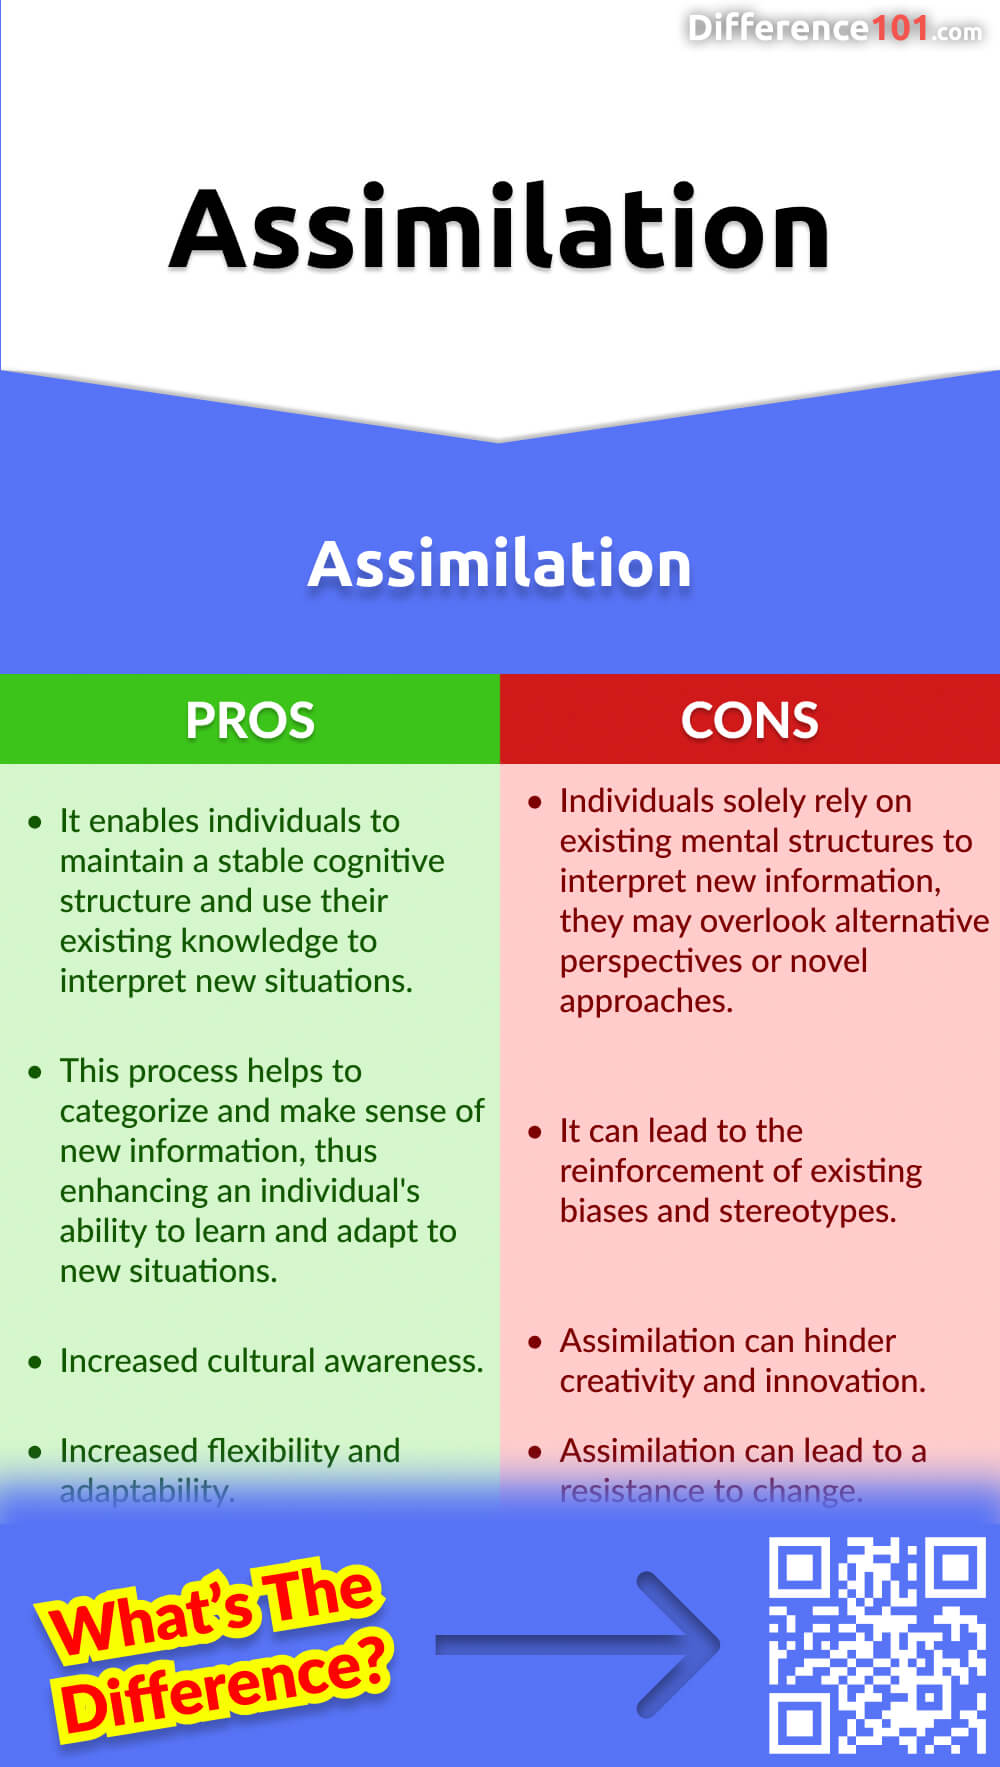 Assimilation Pros & Cons
